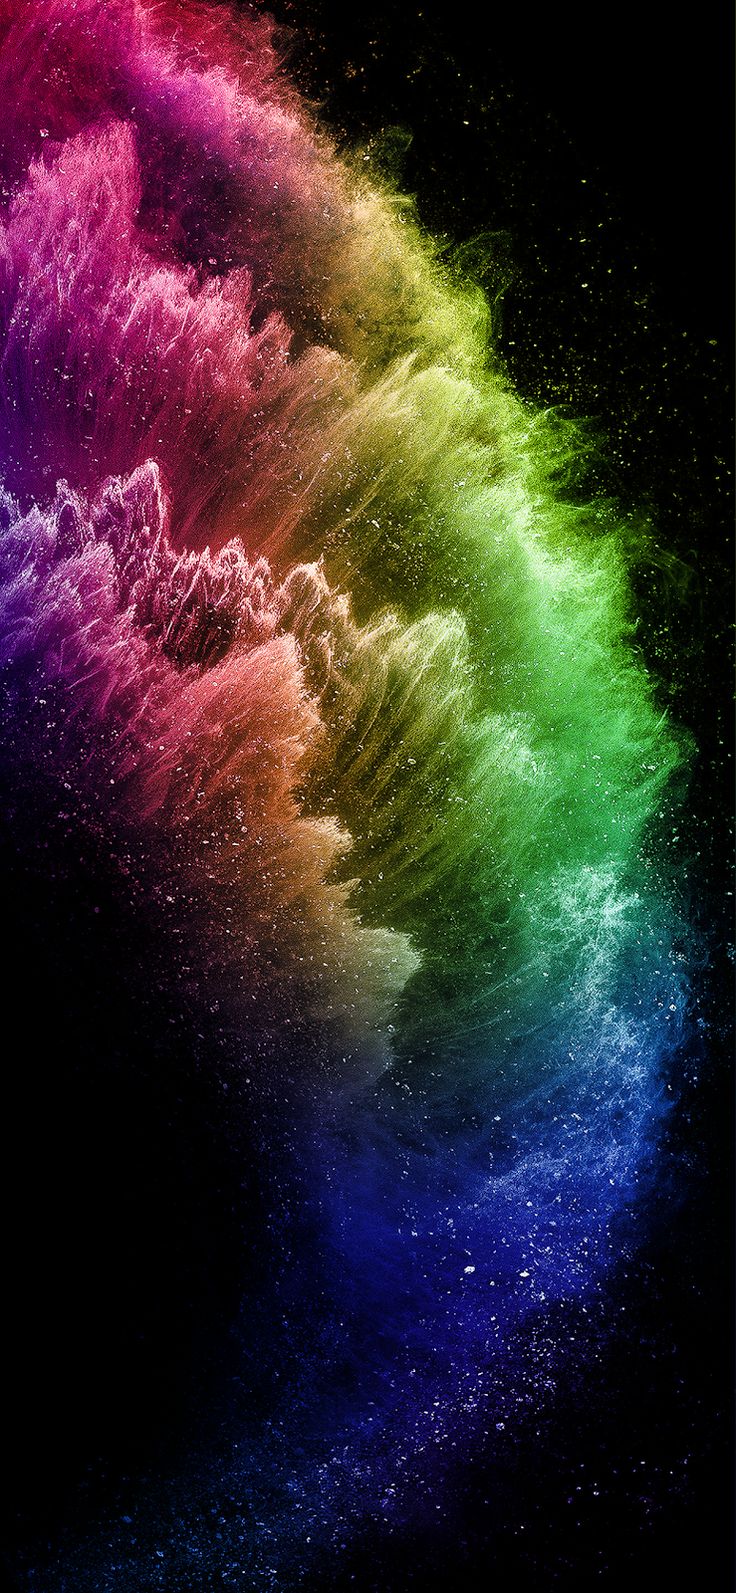 The best Abstract Designs for Posters, Wall Art, Wallpaper, Stickers, Phone Covers and. Rainbow wallpaper iphone, Live wallpaper iphone, iPhone wallpaper image